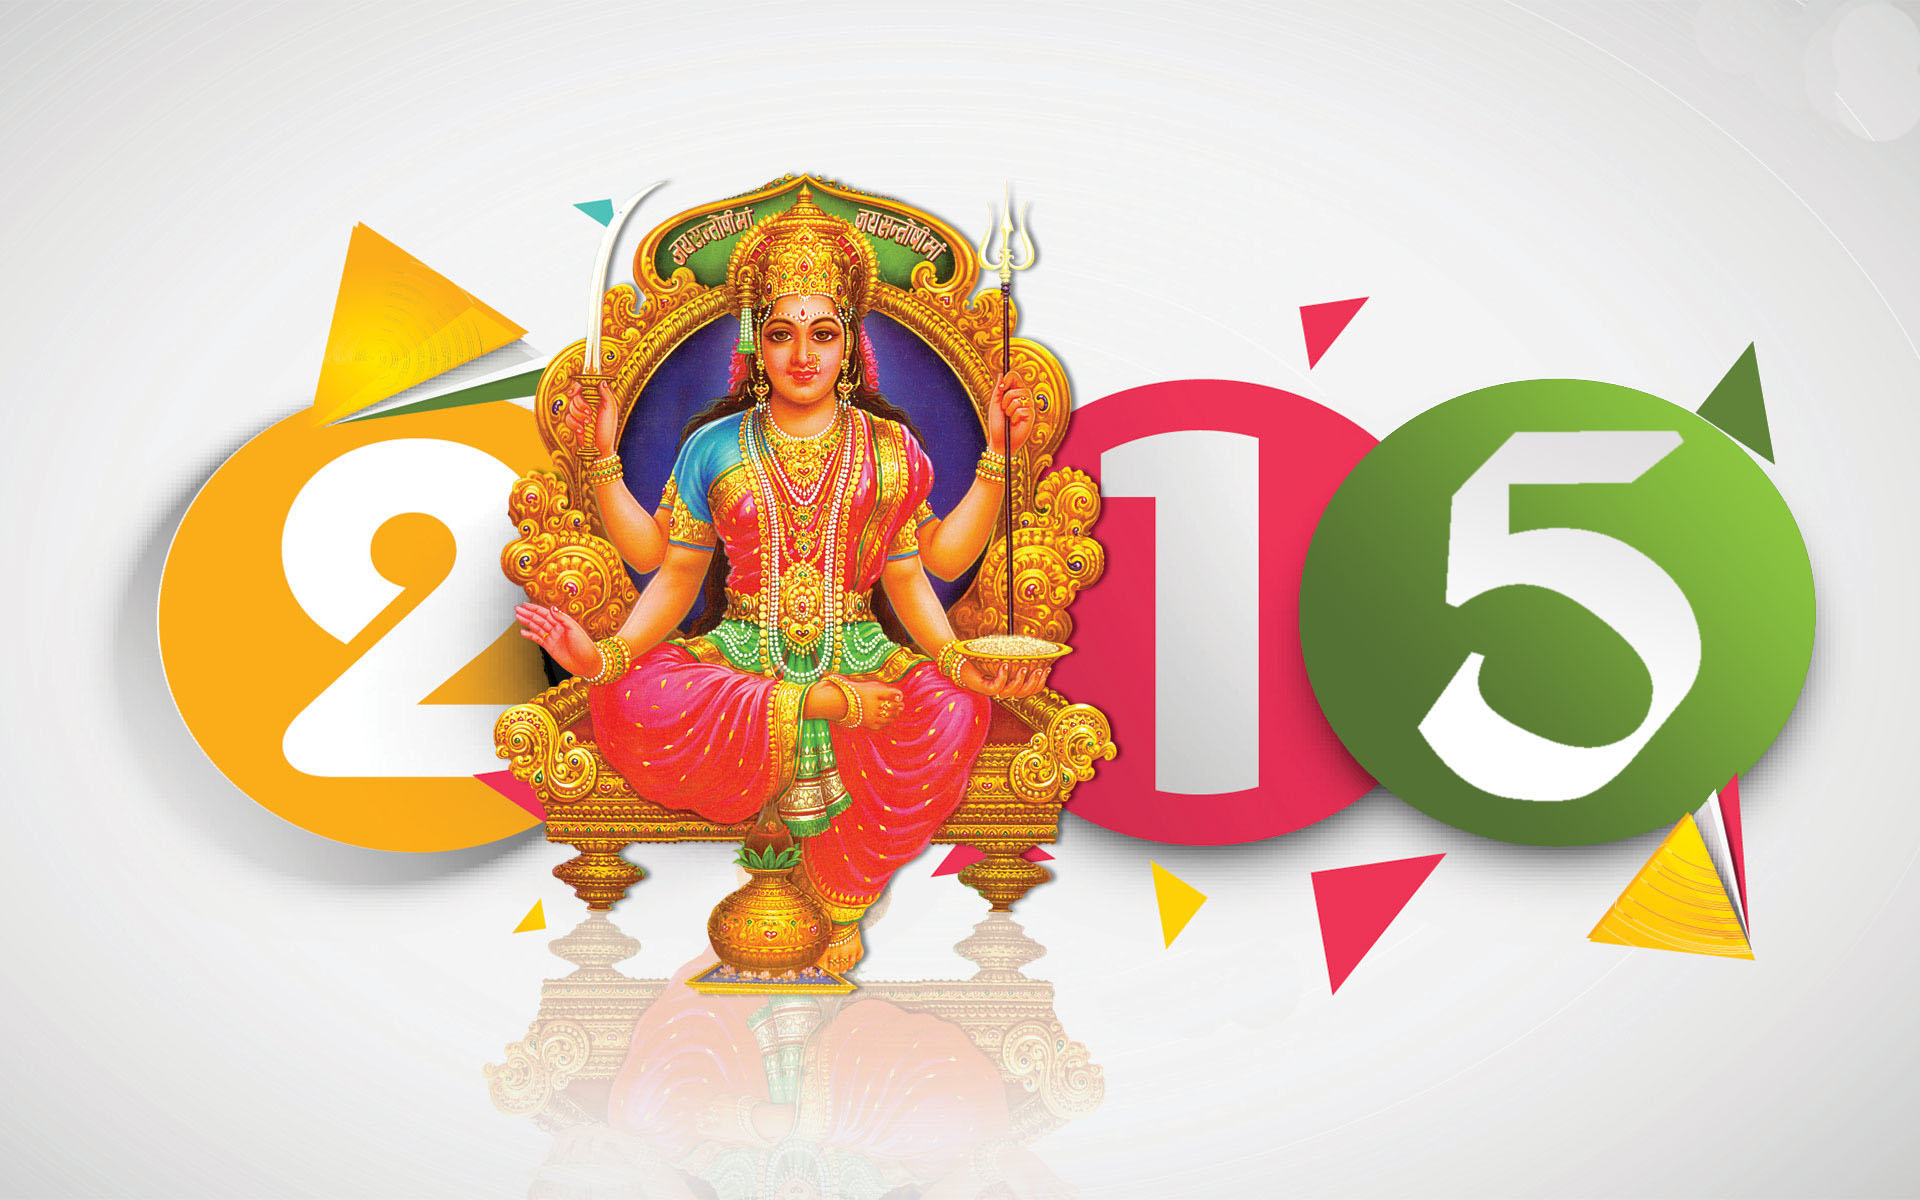 Free download 2015 New Year Santoshi Maa Wallpaper Wide or HD Holidays  Wallpapers [1920x1200] for your Desktop, Mobile & Tablet | Explore 50+  Synyster 2015 Hd Wallpaper | Hd Naturewallpaper 2015, Synyster Gates 2015  Wallpaper, Chelsea Wallpaper 2015 Hd